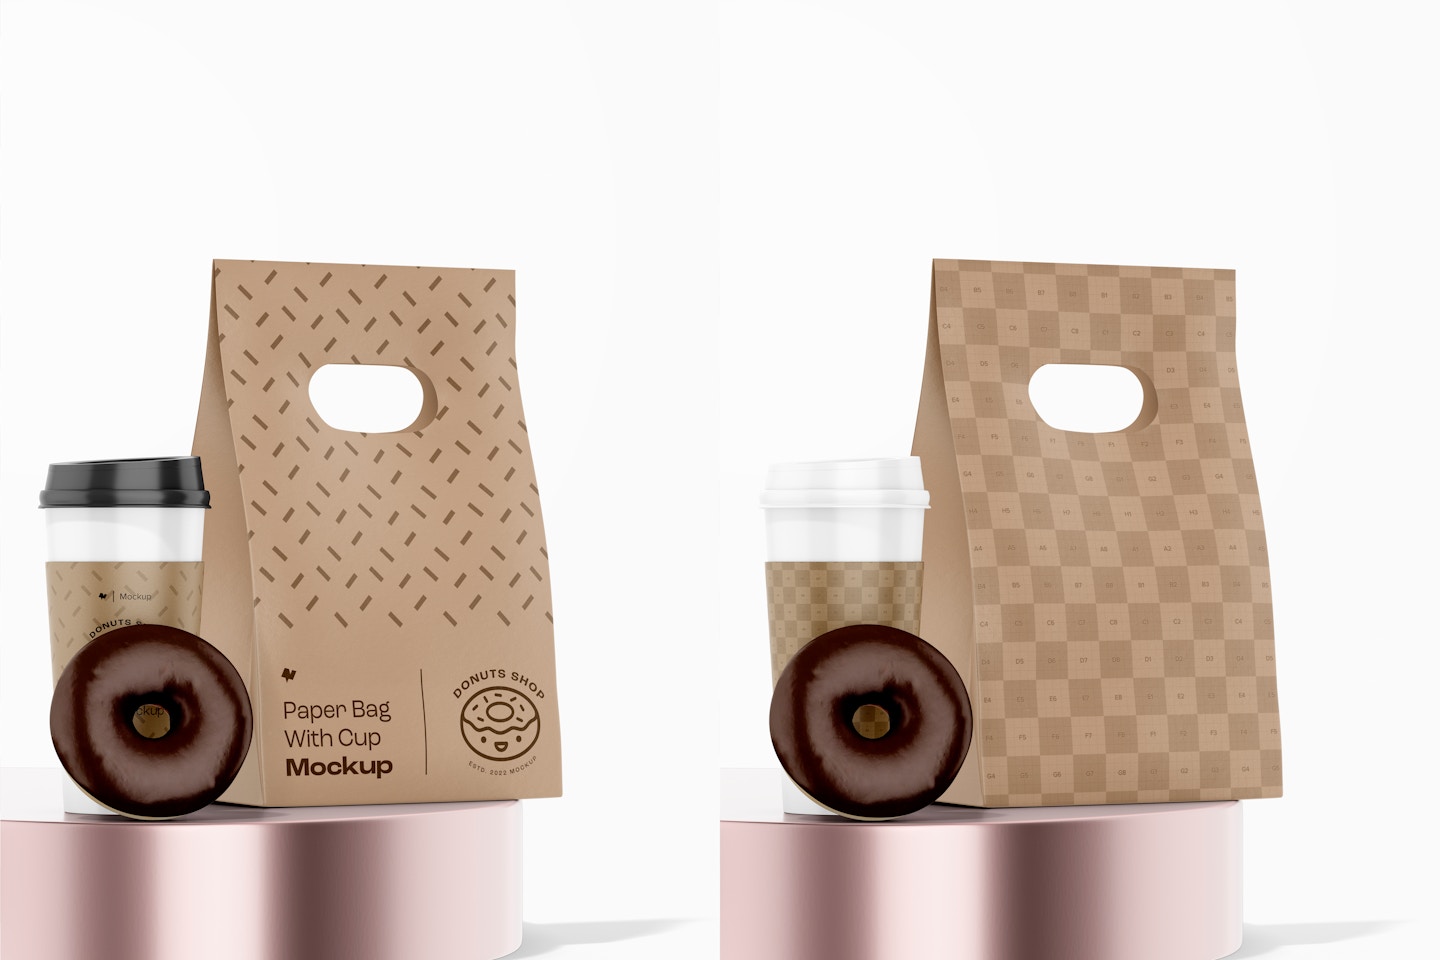 Paper Bag with Cup Mockup, on Podium